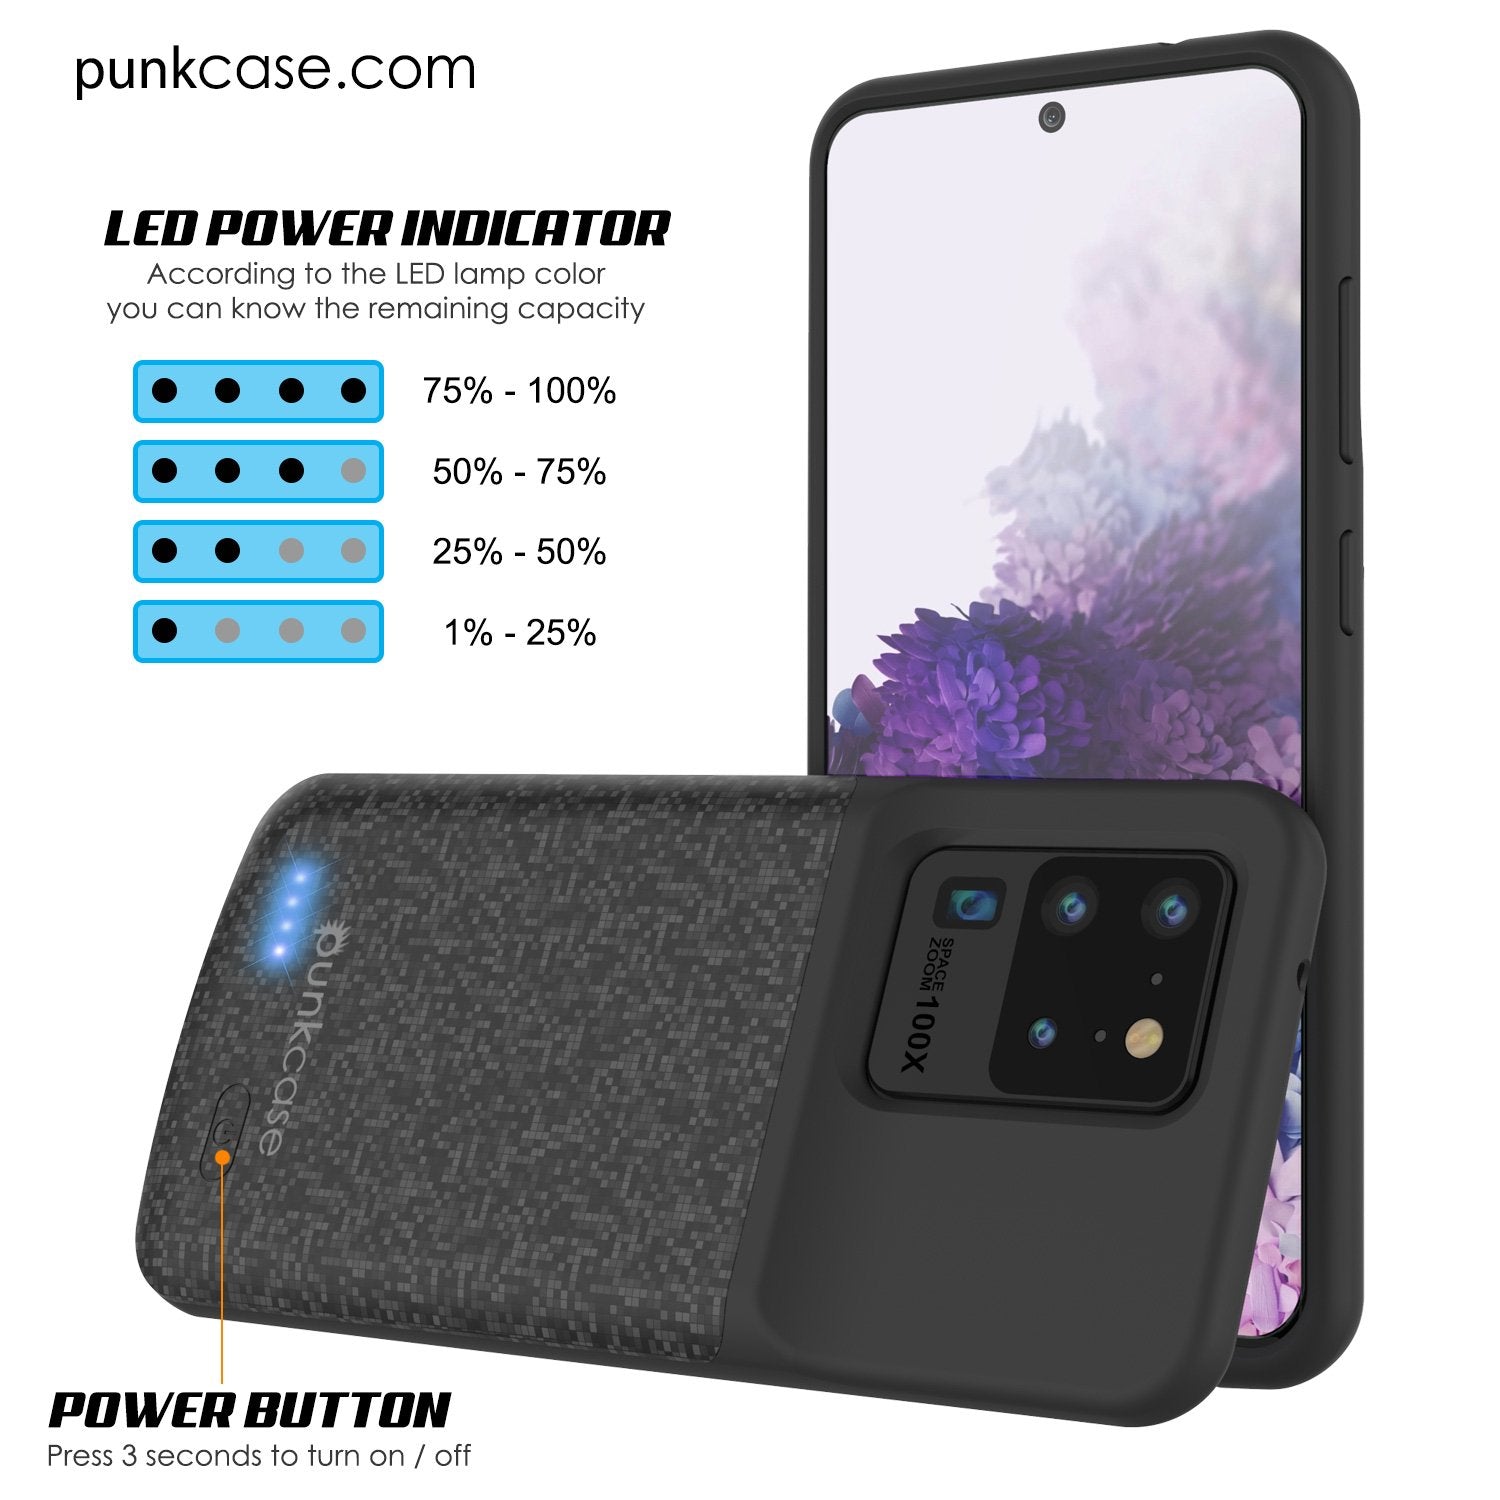 PunkJuice S20 Ultra Battery Case Patterned Black - Fast Charging Power Juice Bank with 6000mAh